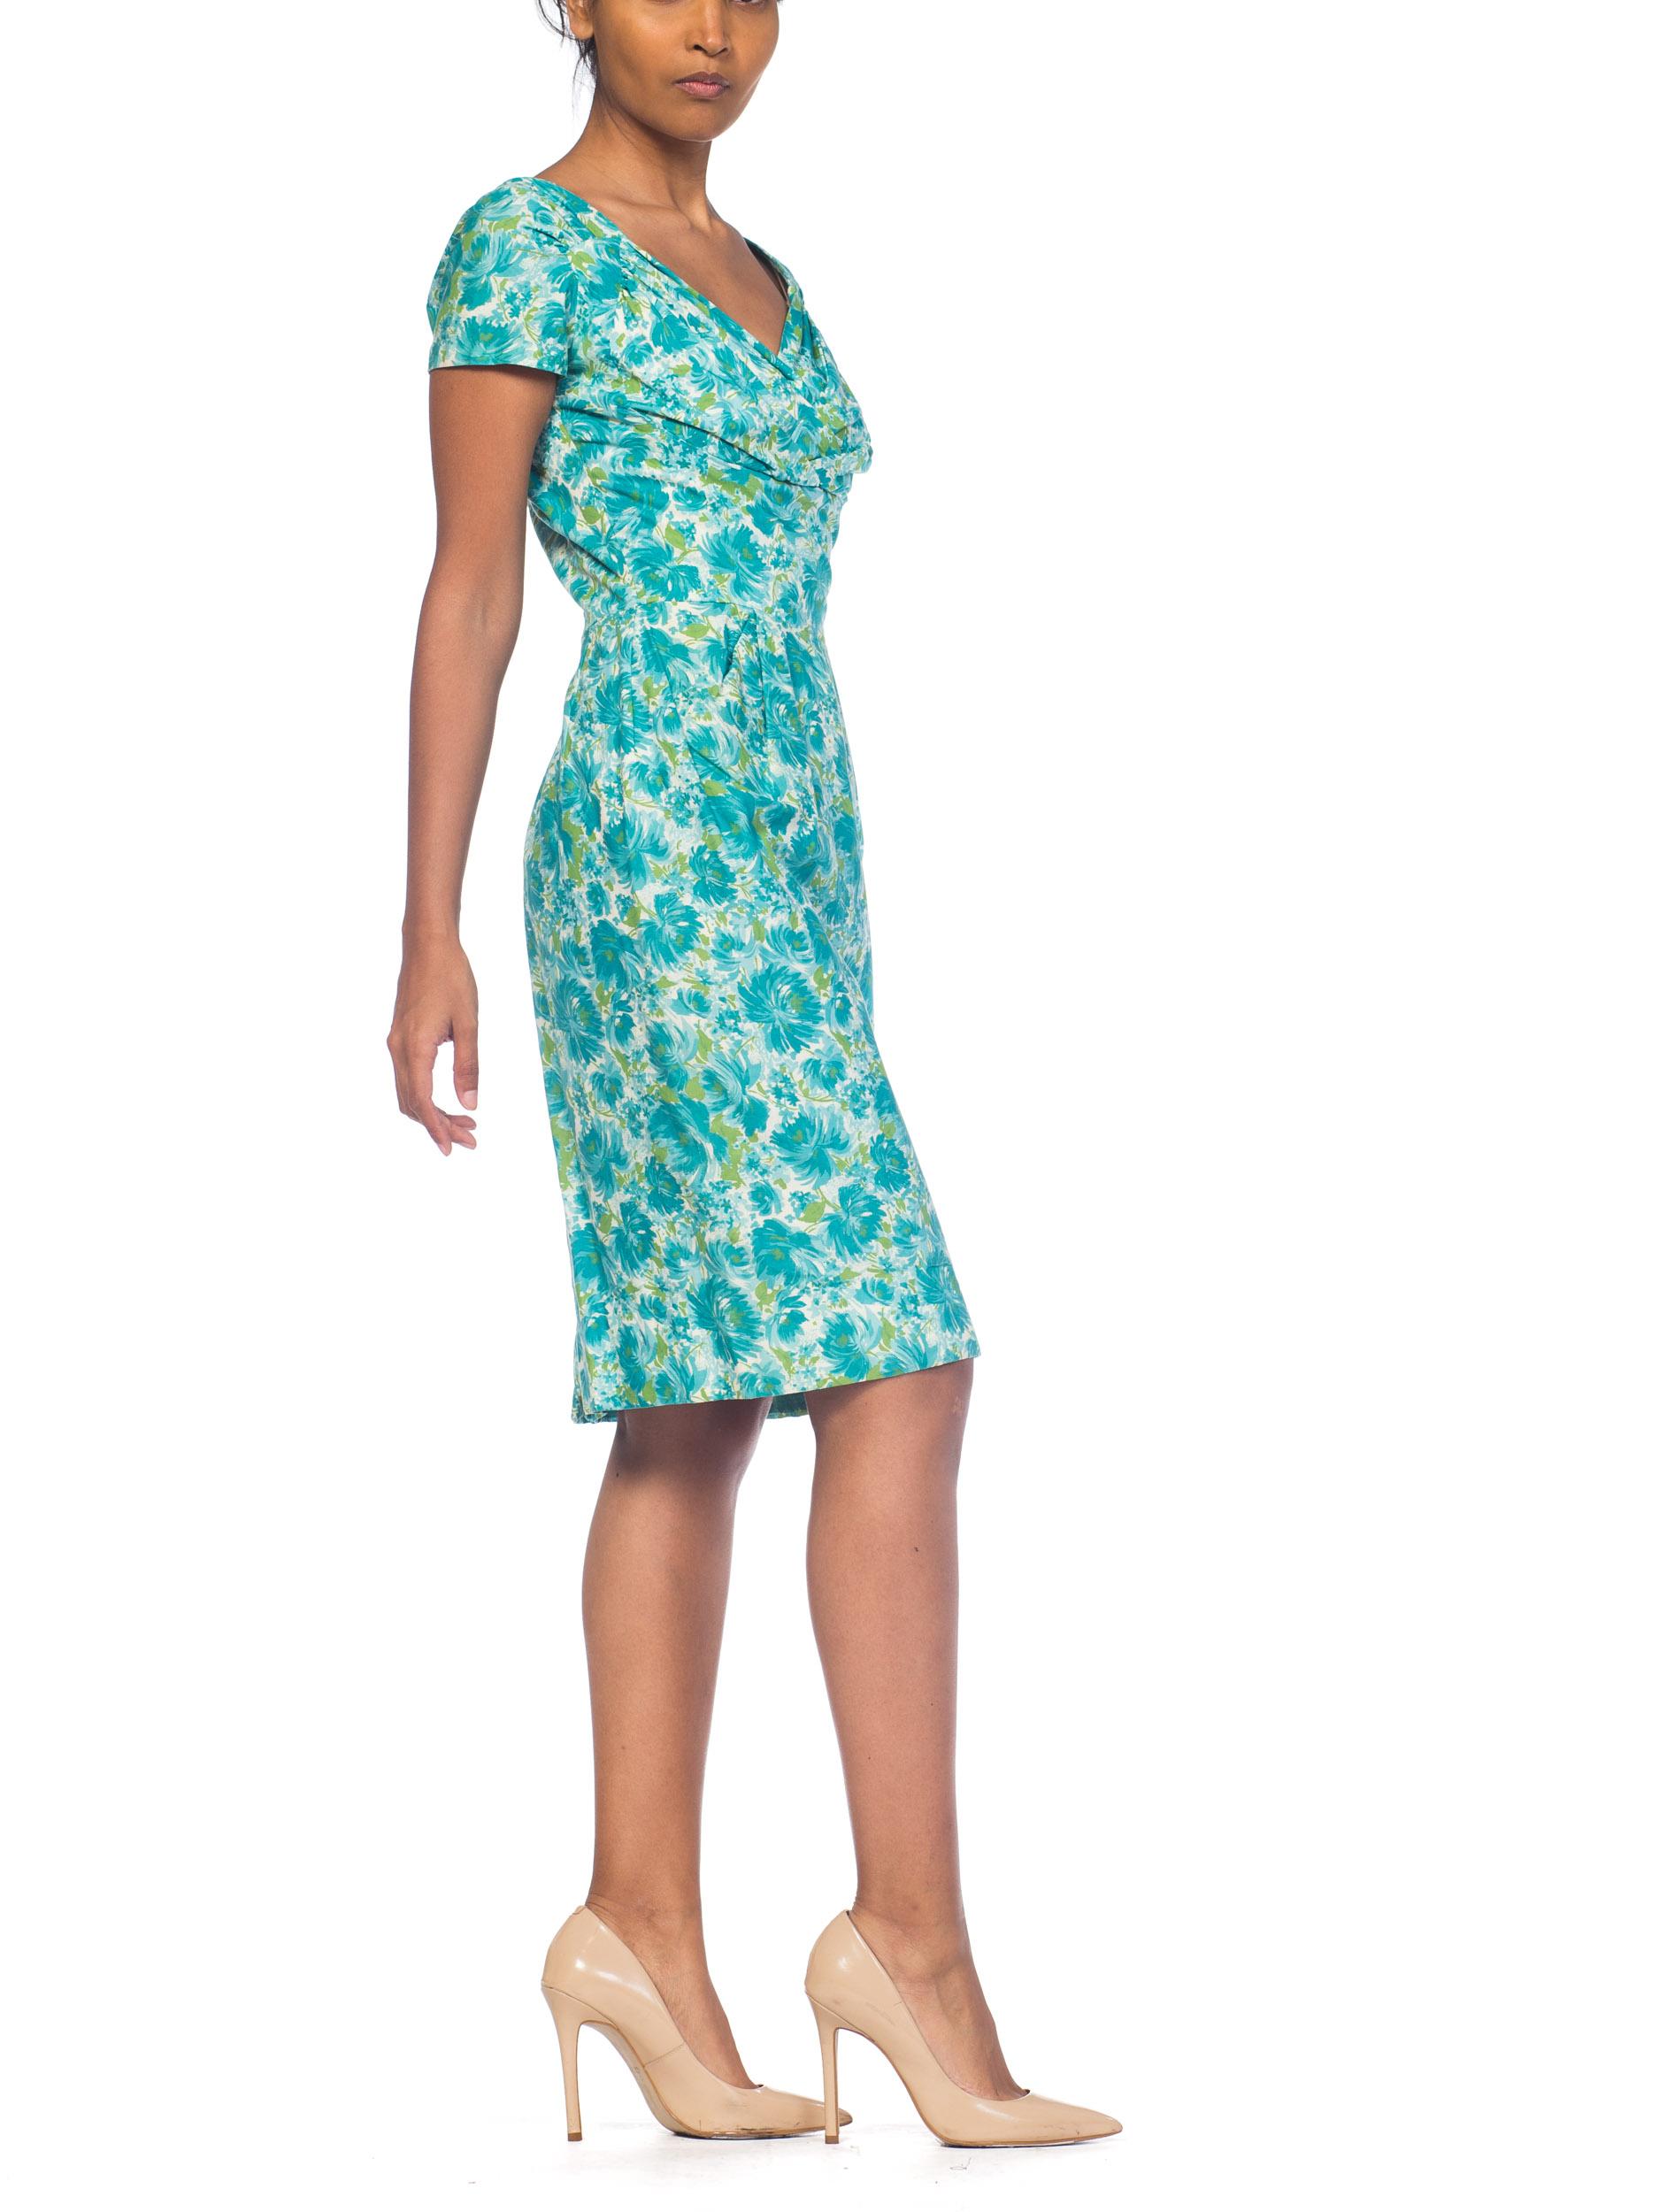 1950S Blue & Green Floral Cotton Dress With Draped Vava-Voom Neckline For Sale 1